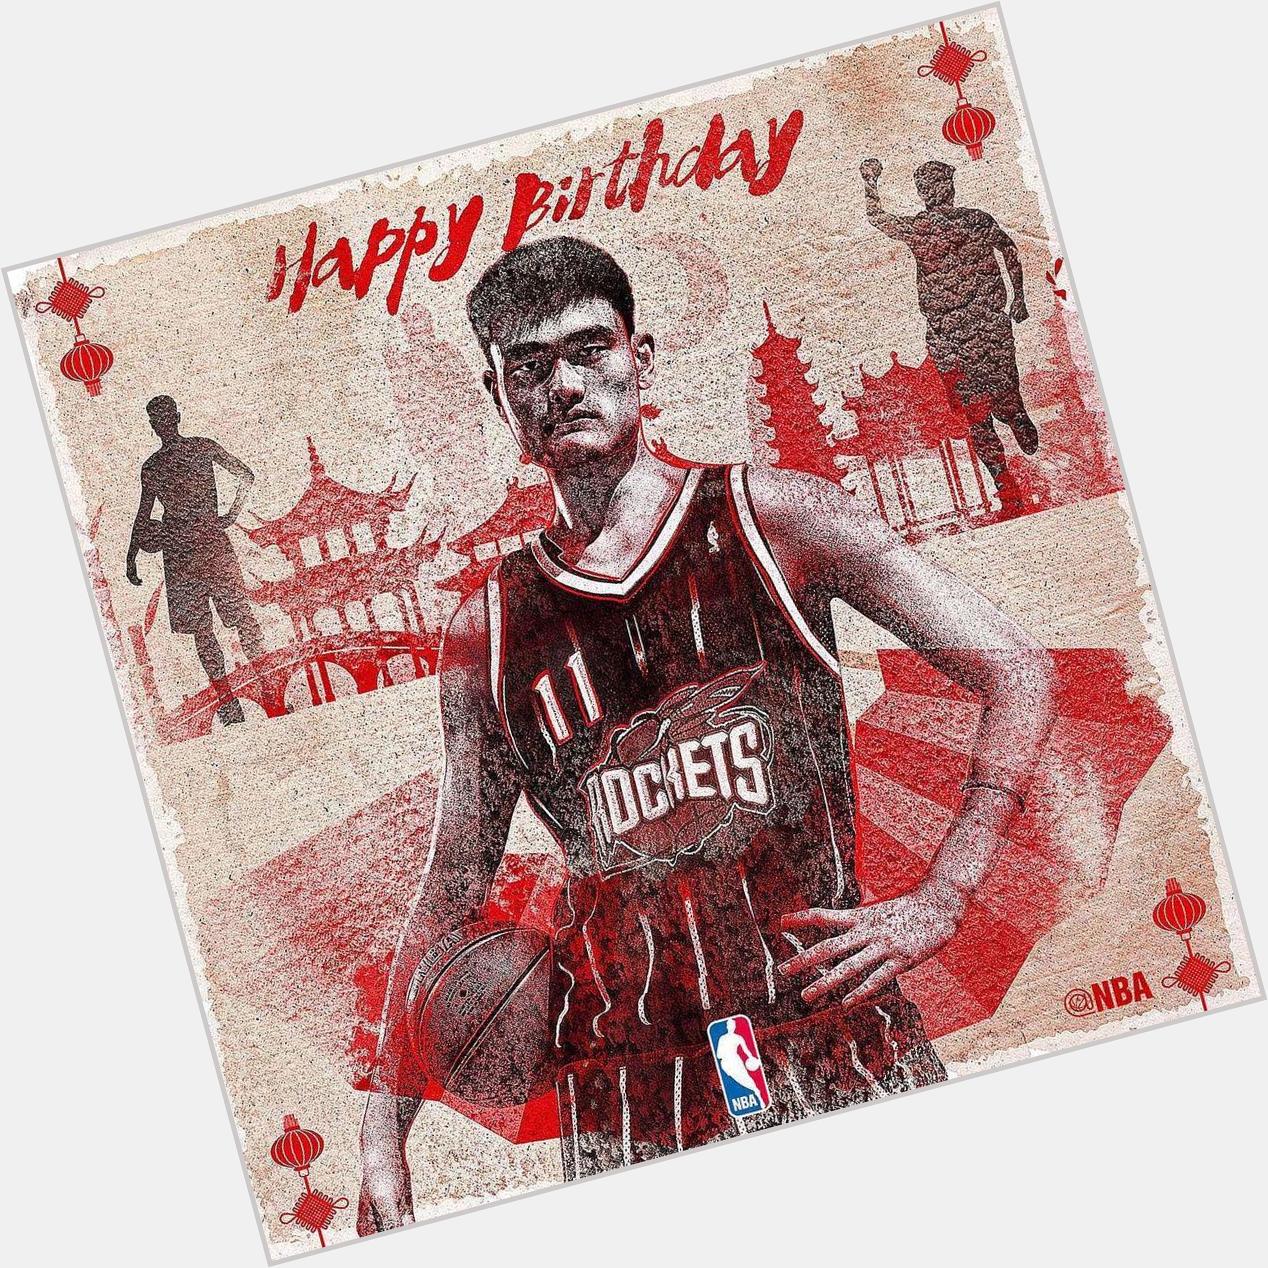 Join us in wishing legend YAO MING a HAPPY 35th BIRTHDAY! by nba 